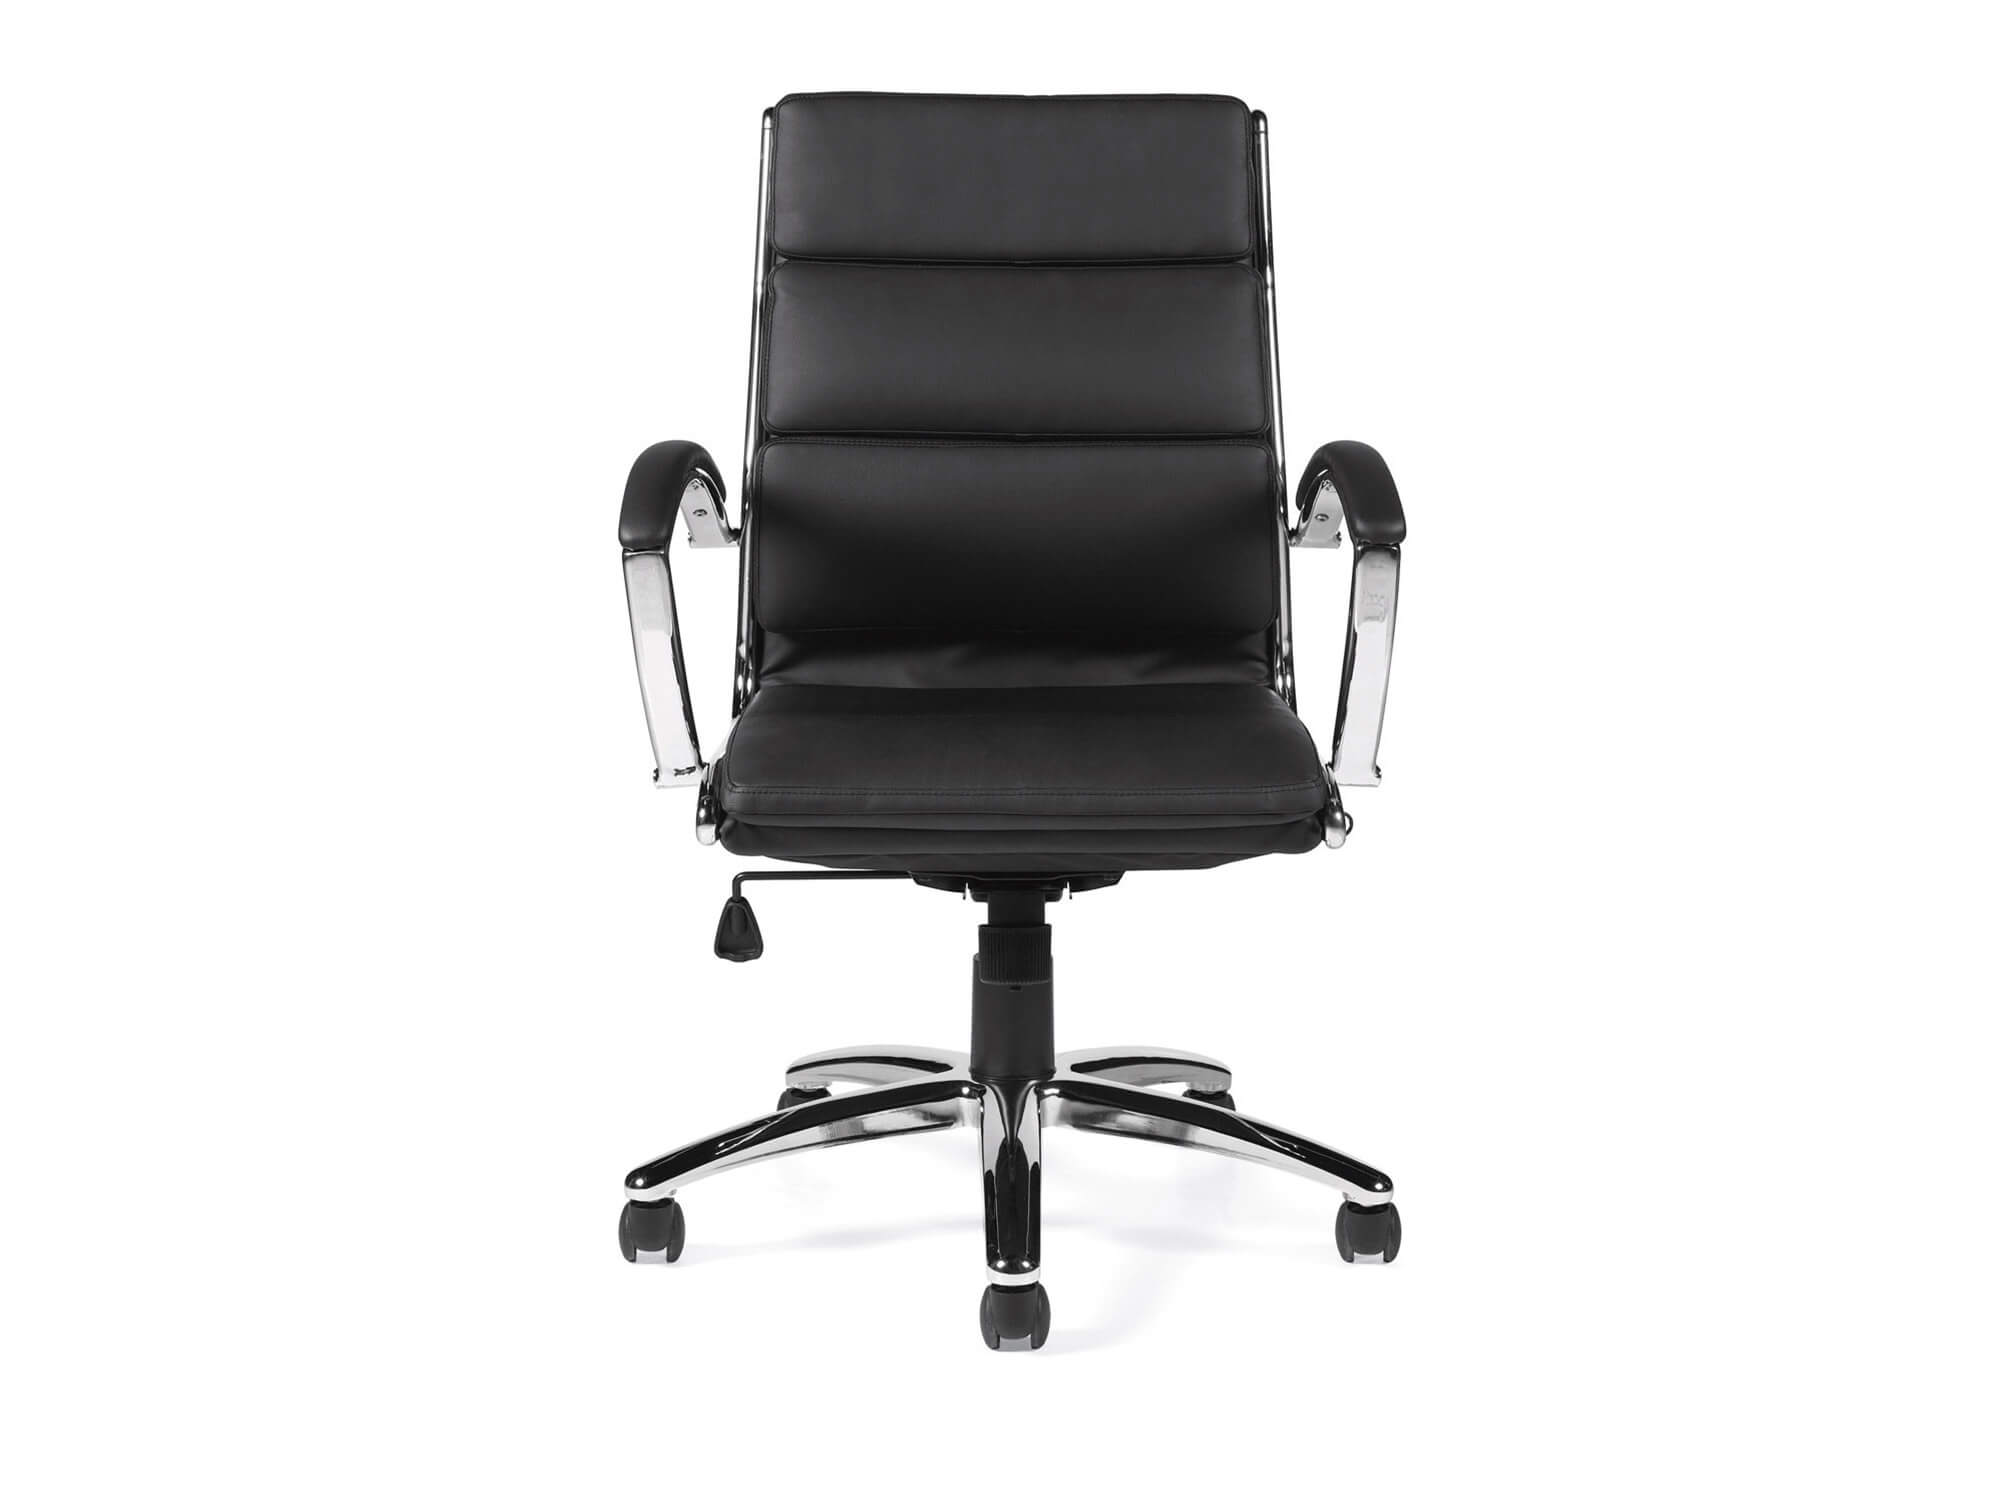 Conference style seating 11648B CUB GTO